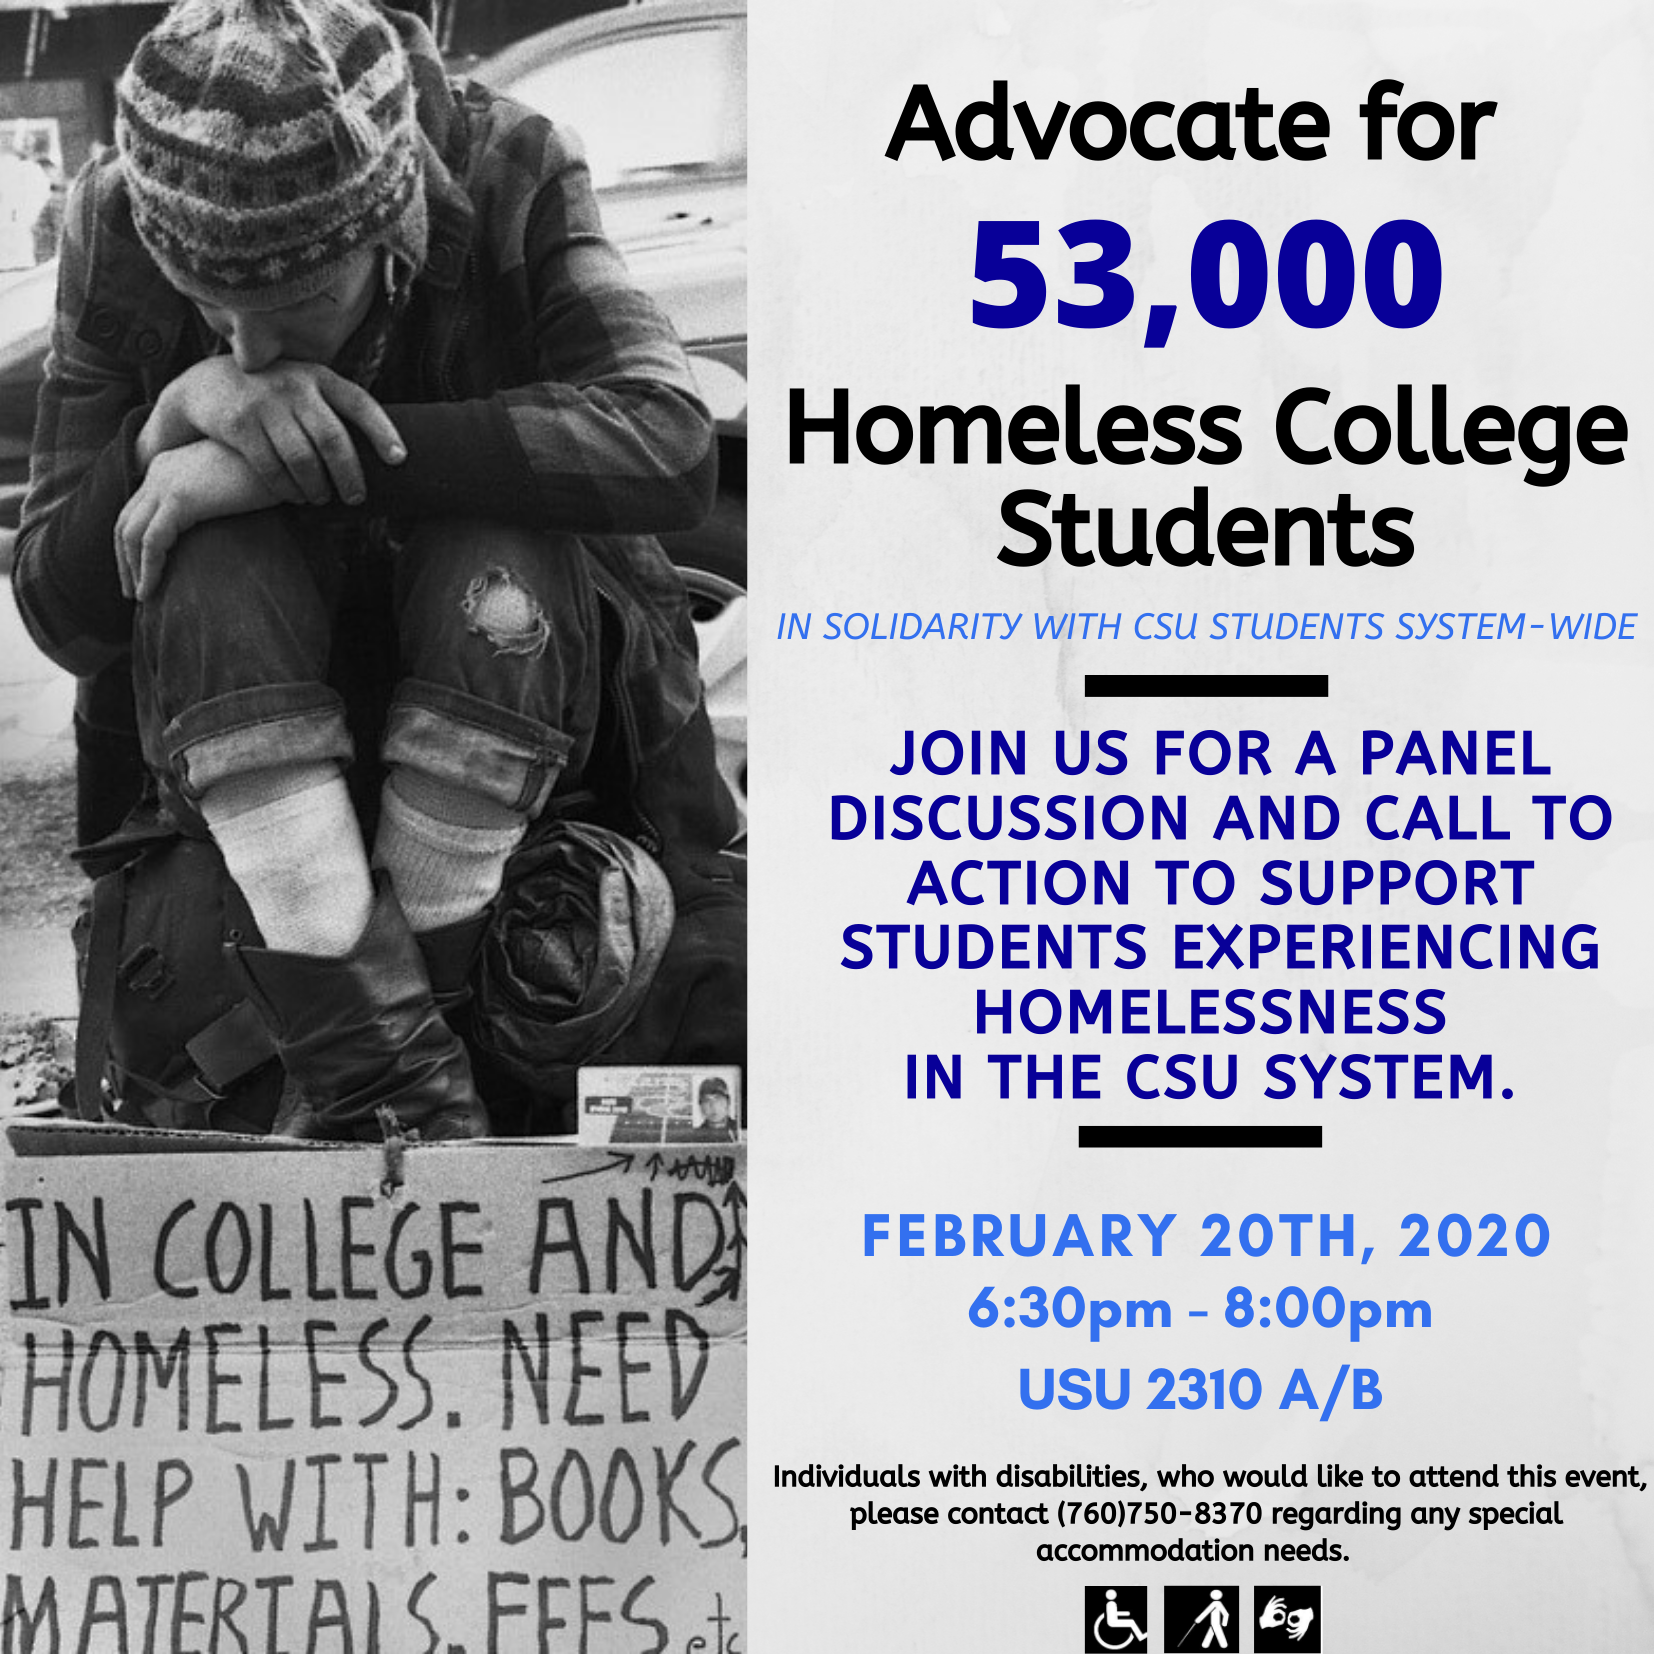 Homeless College Students in The CSU